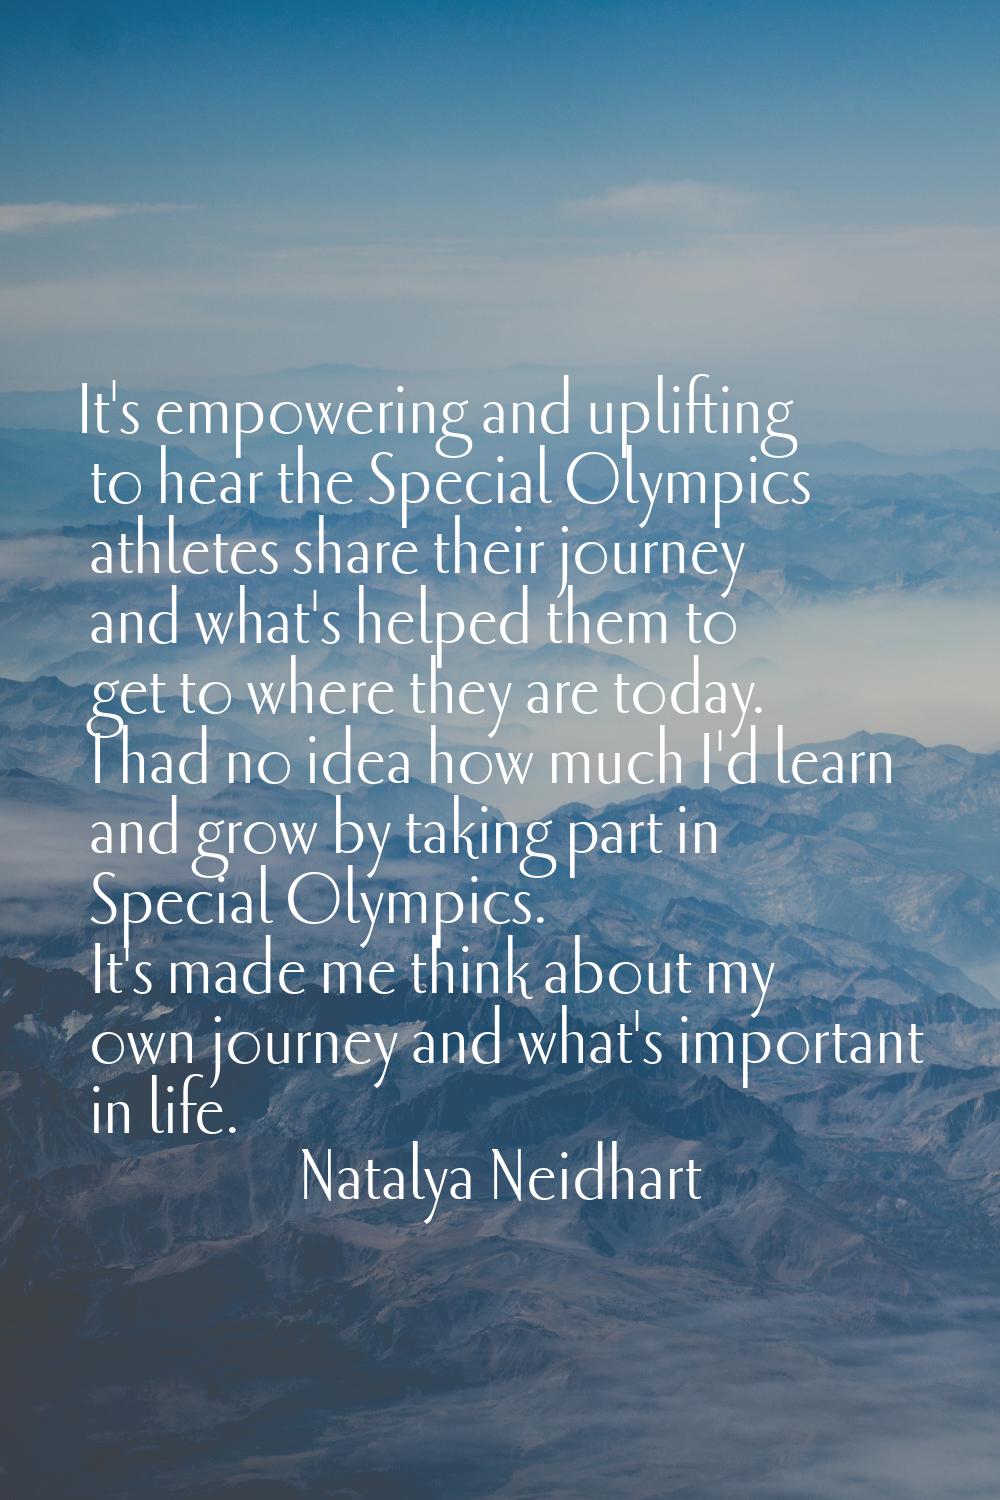 It's empowering and uplifting to hear the Special Olympics athletes share their journey and what's 